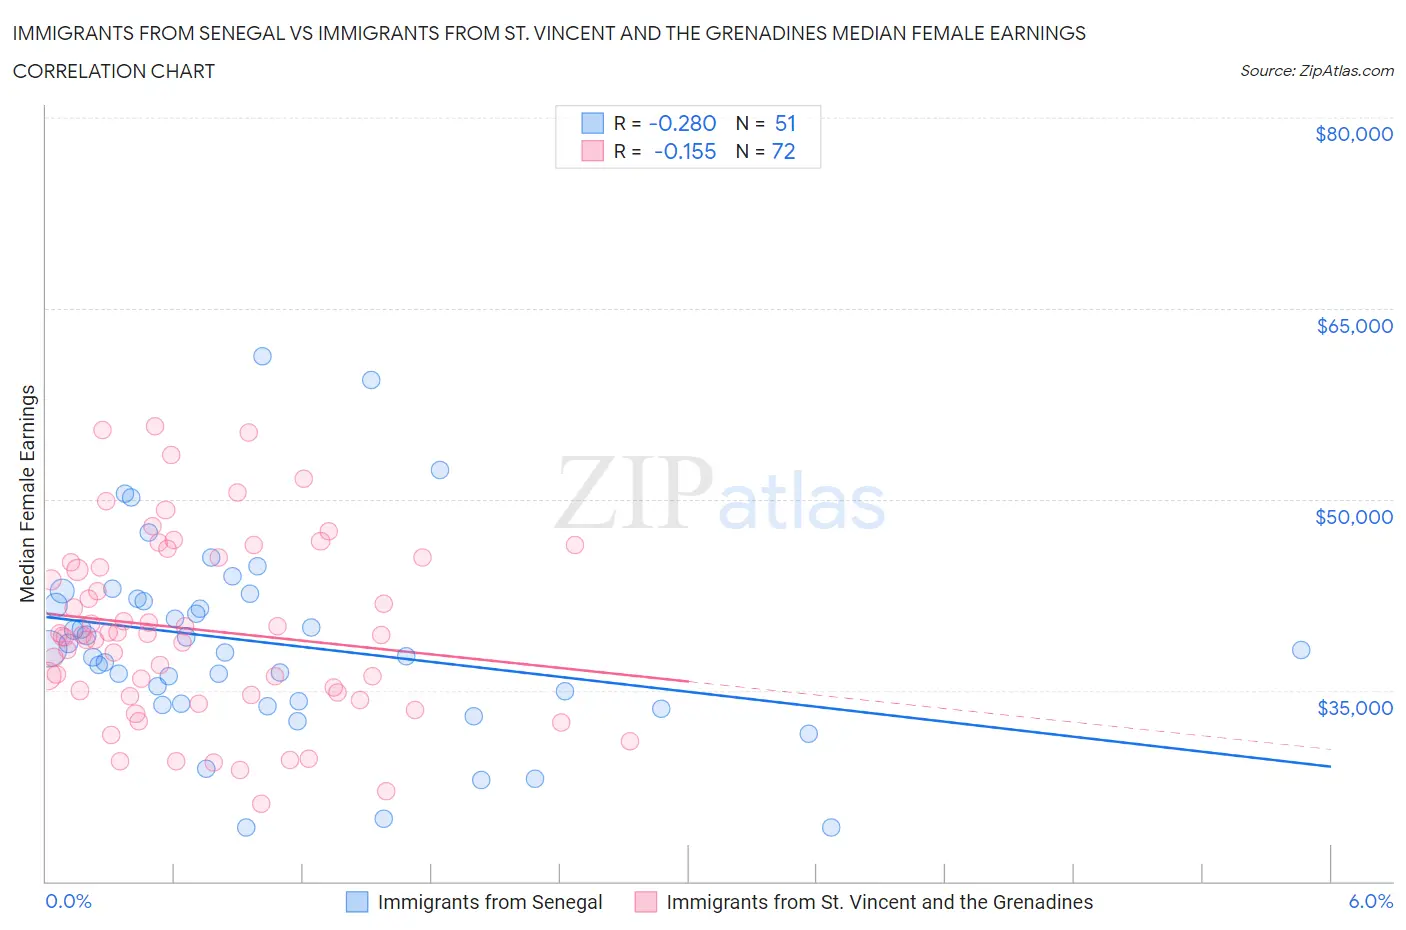 Immigrants from Senegal vs Immigrants from St. Vincent and the Grenadines Median Female Earnings